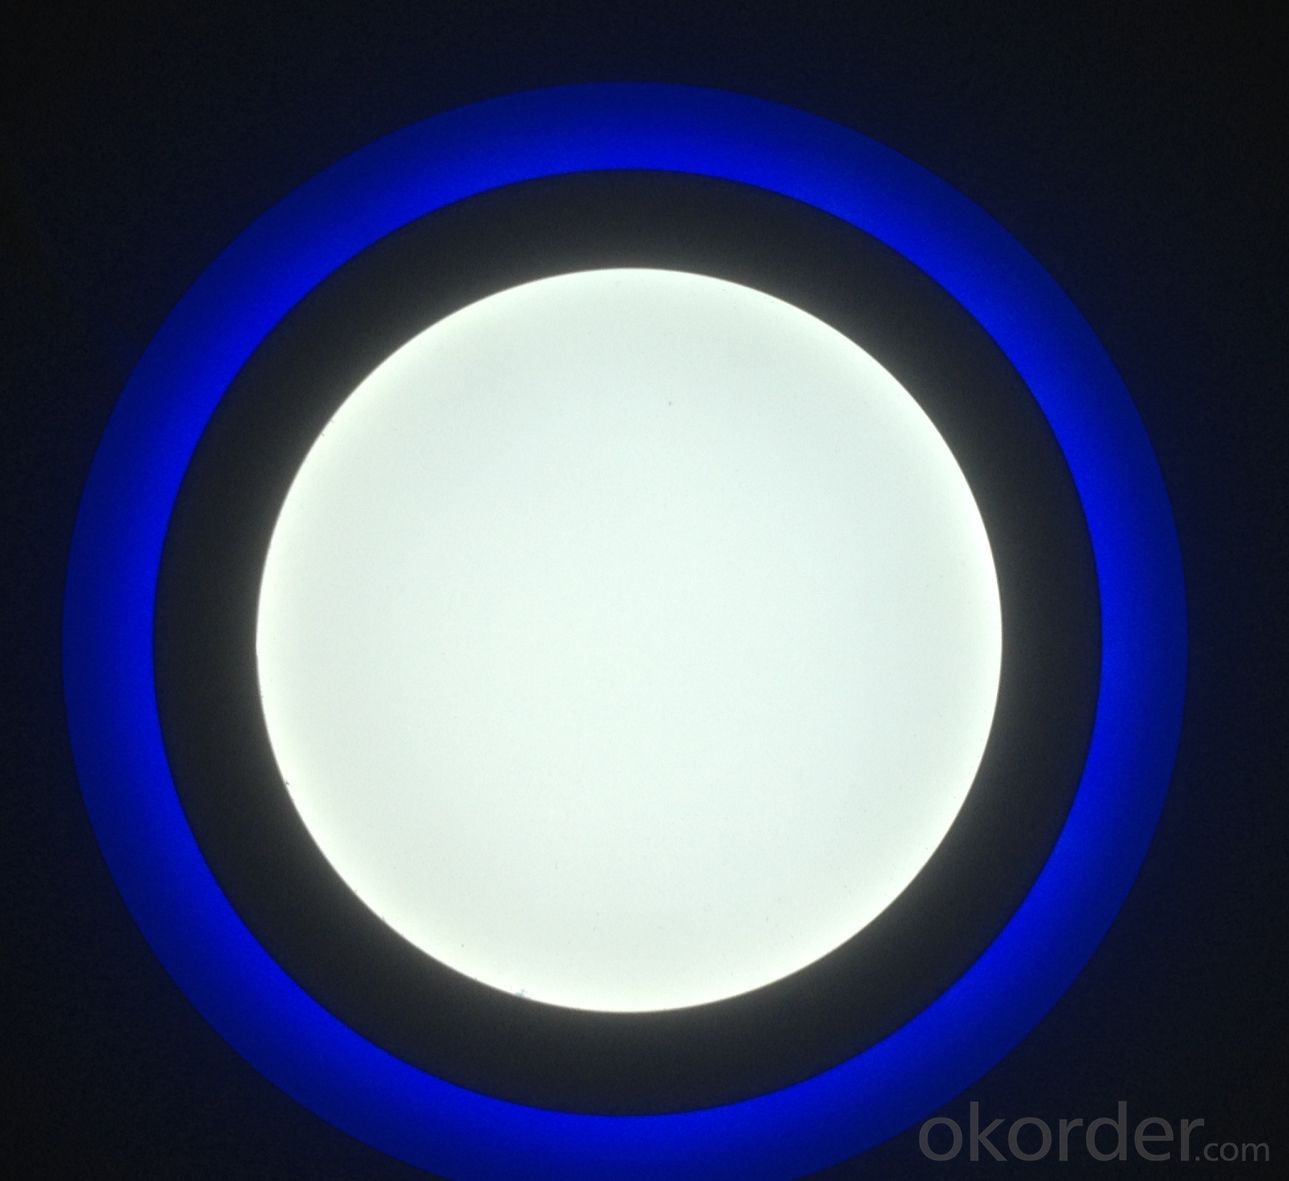 LED PANEL LIGHT DOUBLE 18 AND 6 W COLOR ROUND  SHAPE RECESSED TYPE BLUE AND 6000K